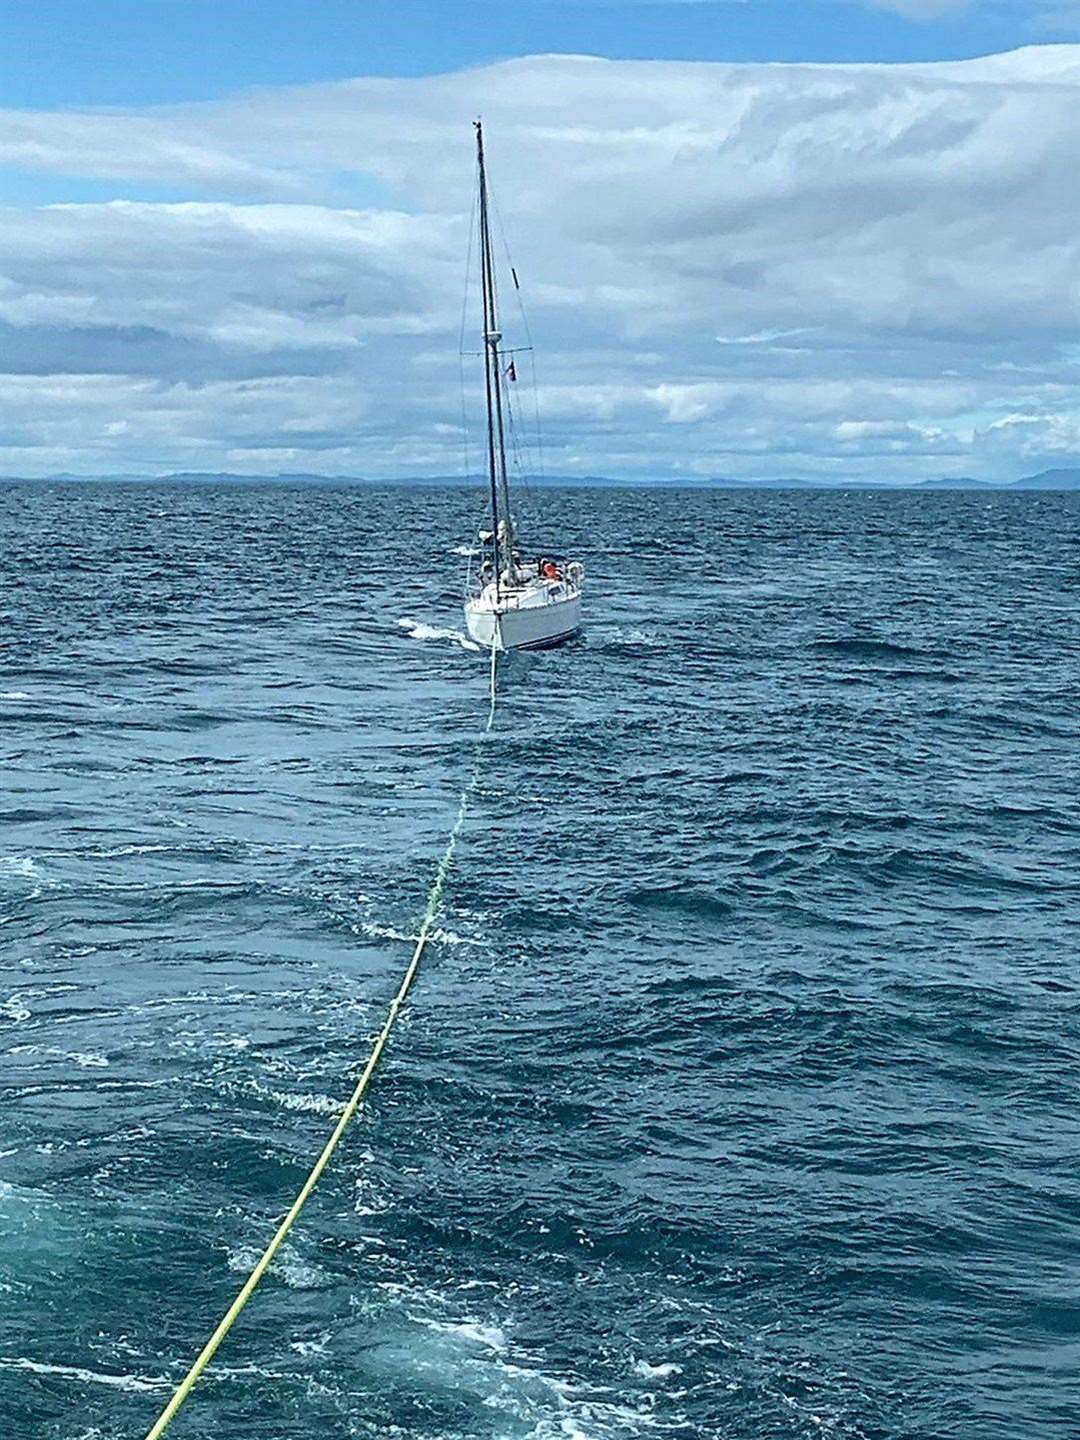 The Buckie RNLI lifeboat crew establish a tow to the yacht. Picture: Buckie RNLI